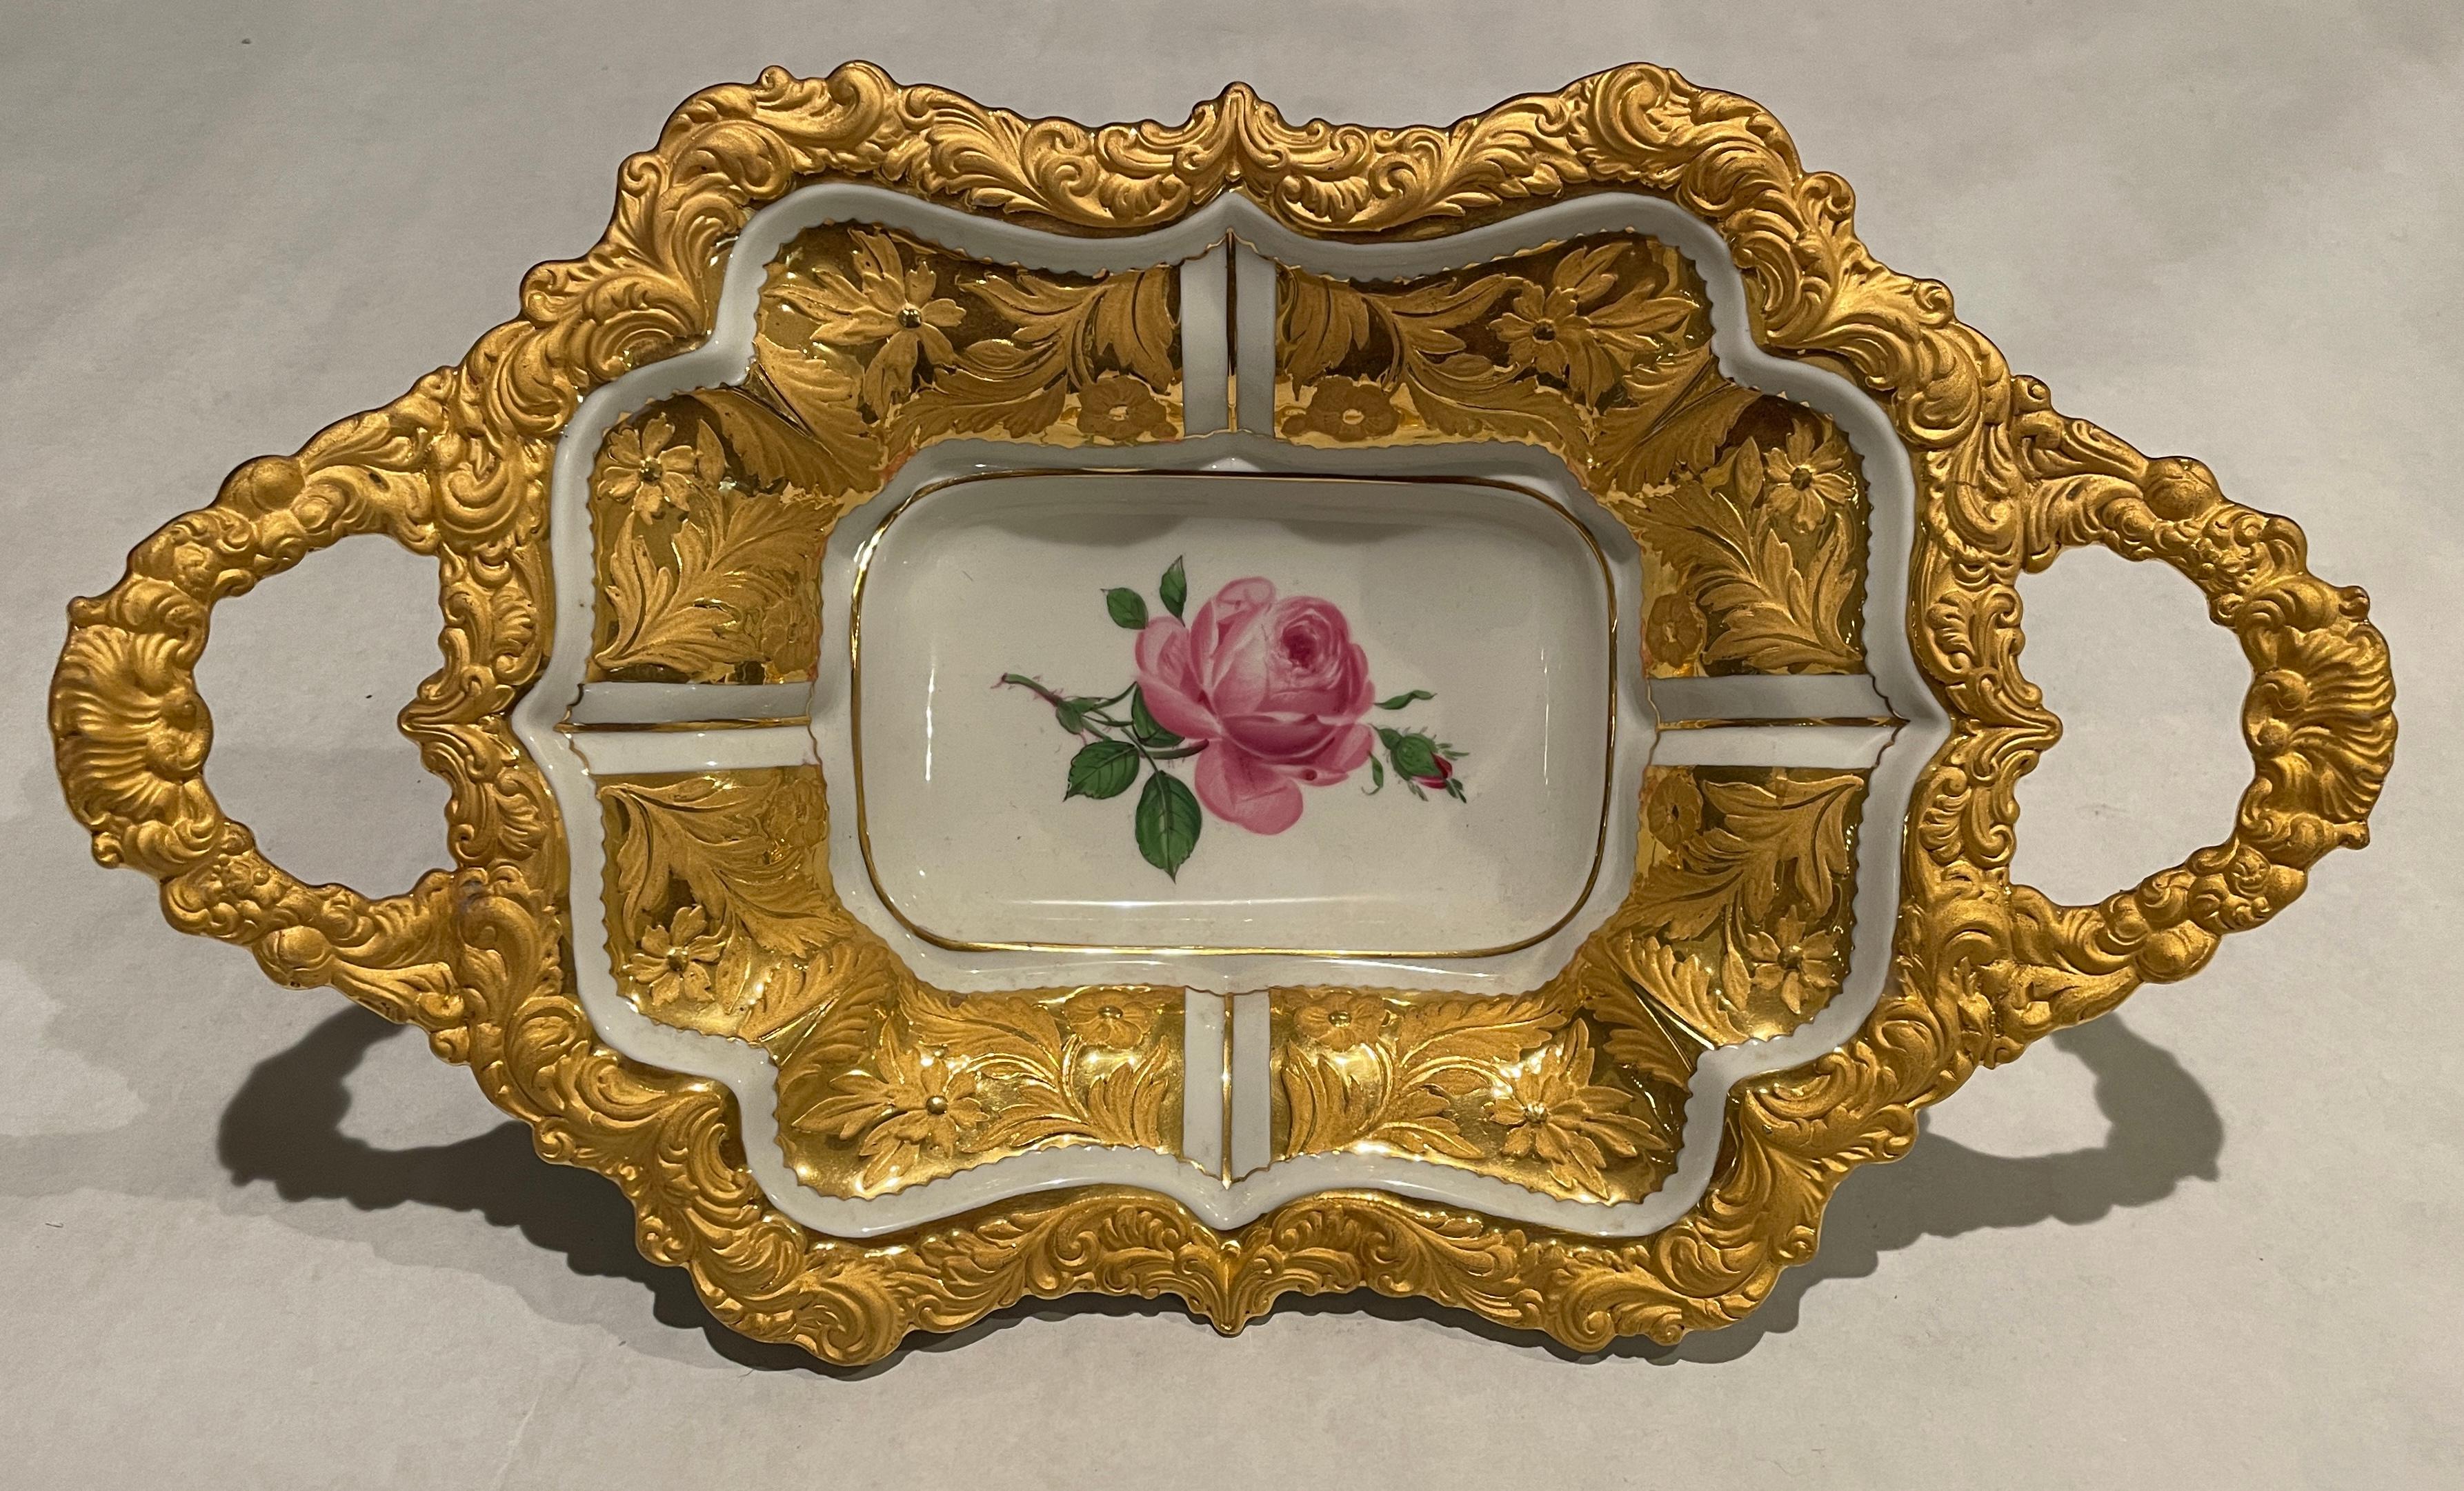 Two handled Meissen heavily gilded charger or tray with pink rose painted flower in center and raised gold flower and leaf decoration on interior panels as well as rim and handles. Crossed swords with top center dot date this beautiful platter to